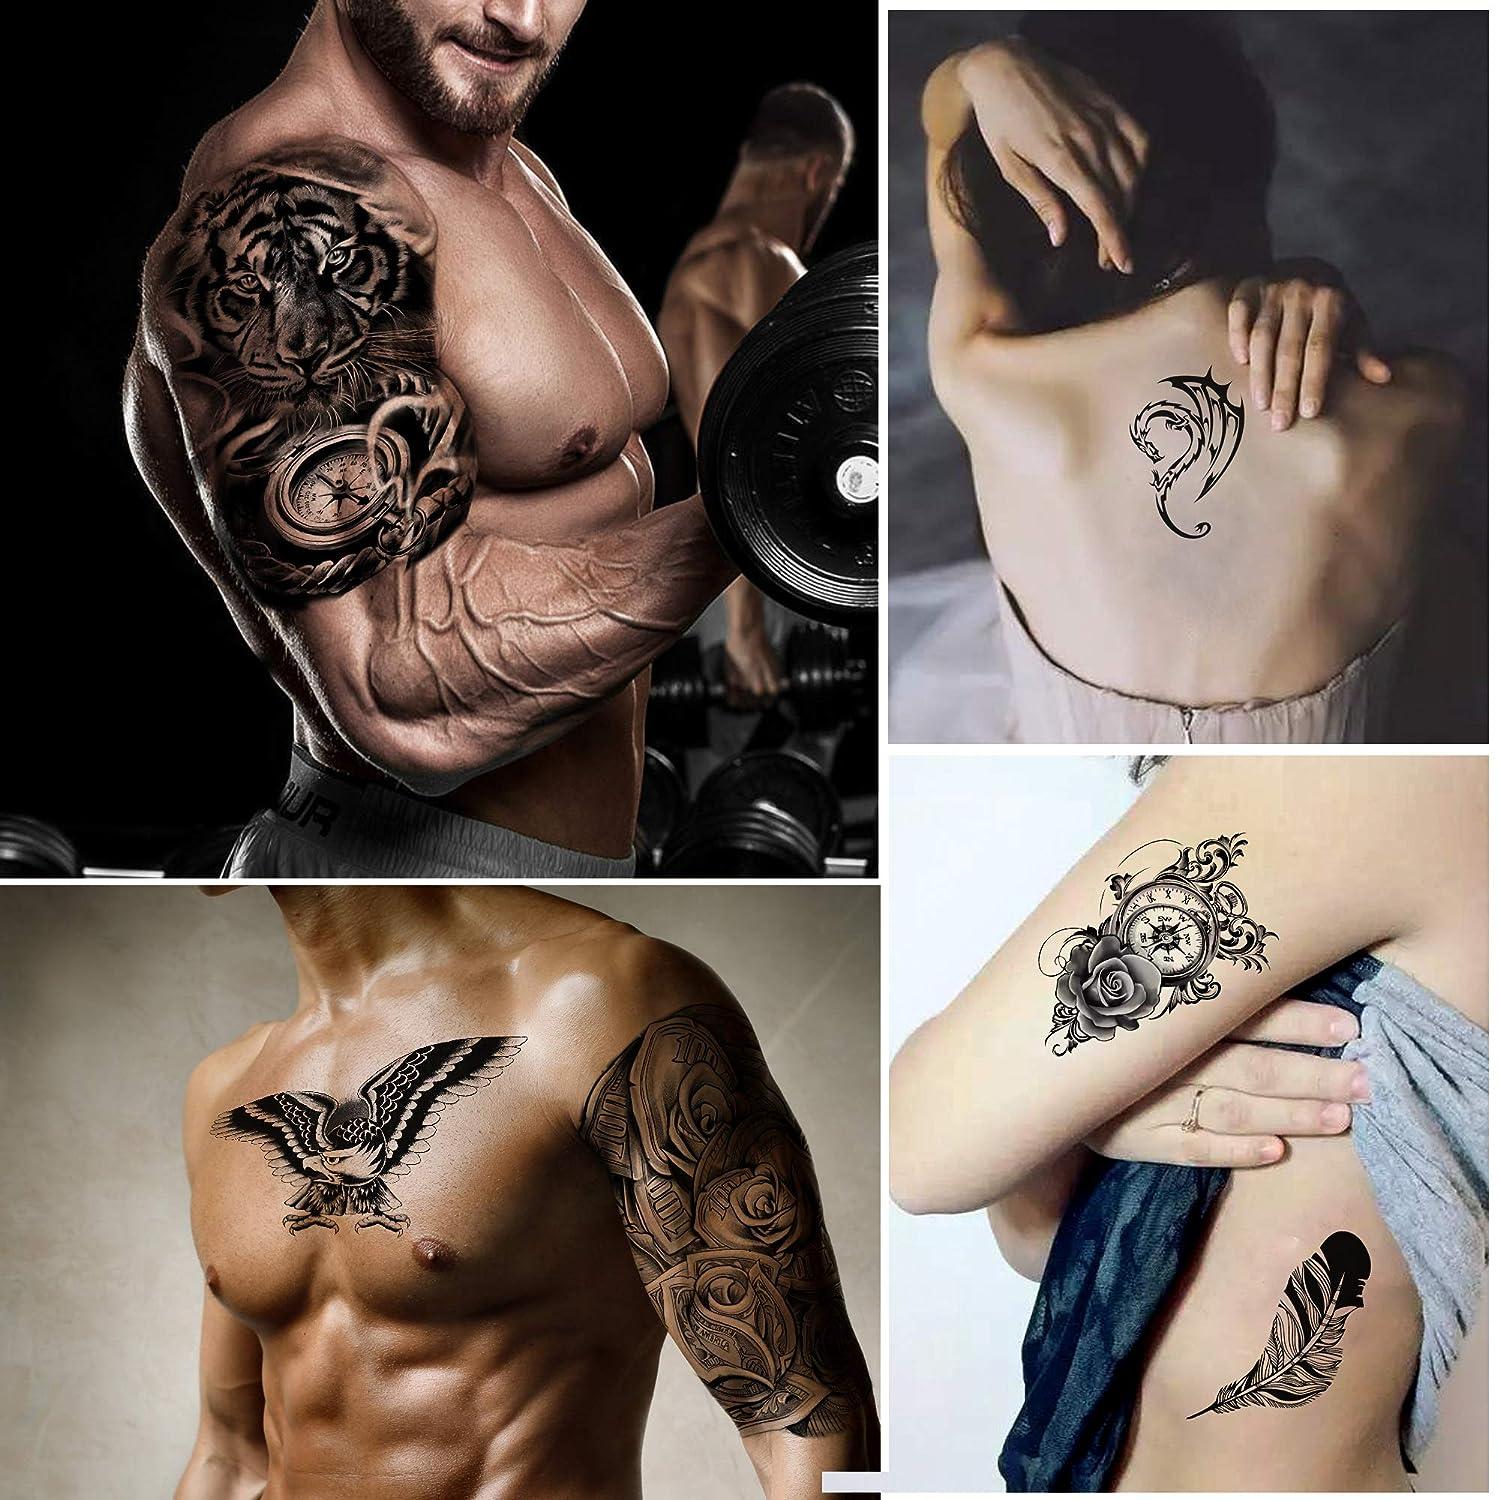 Set Of 5 Black Rose Goth Temporary Tattoos For Body, Clavicle, Ankle, Legs,  Arms, And Bikini Flower Feather Elephant Stickers For Parties And Tattoo  Art Z0403 From Misihan09, $3.3 | DHgate.Com